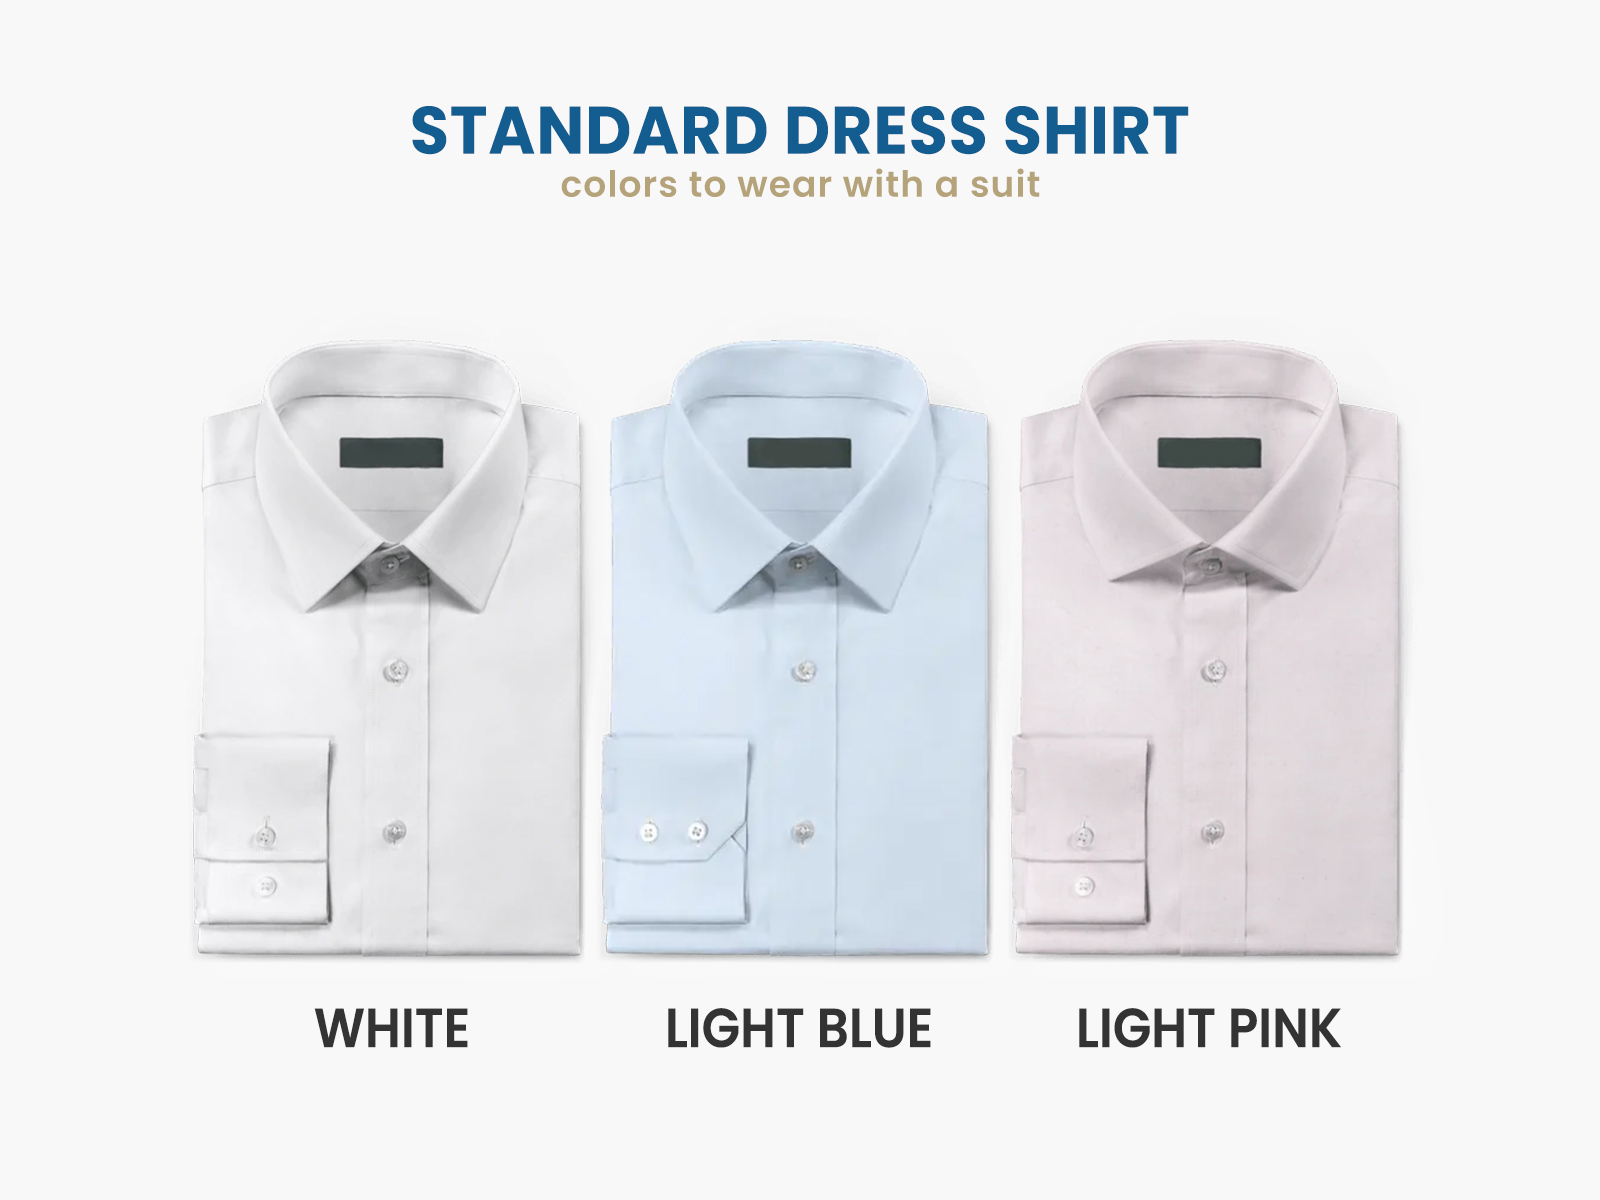 standard dress shirt colors to wear with a suit